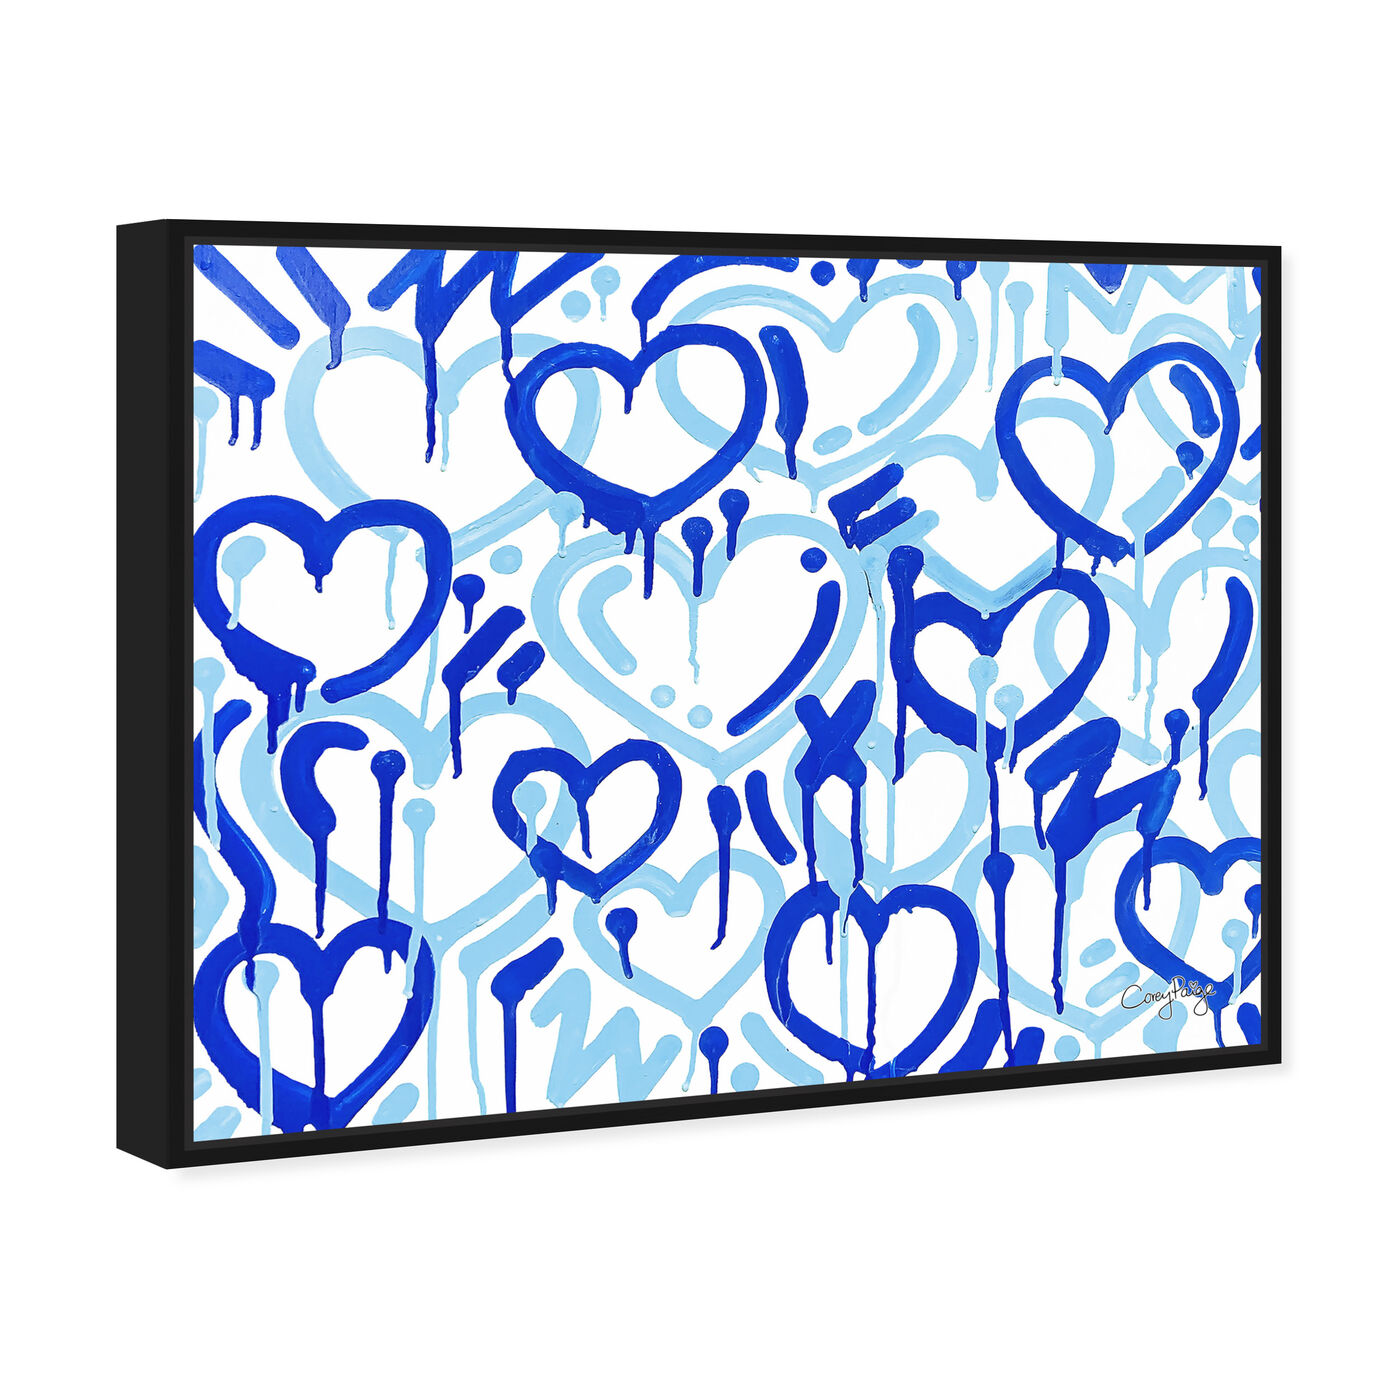 Angled view of Corey Paige - Blue Electric Love  featuring abstract and textures art.